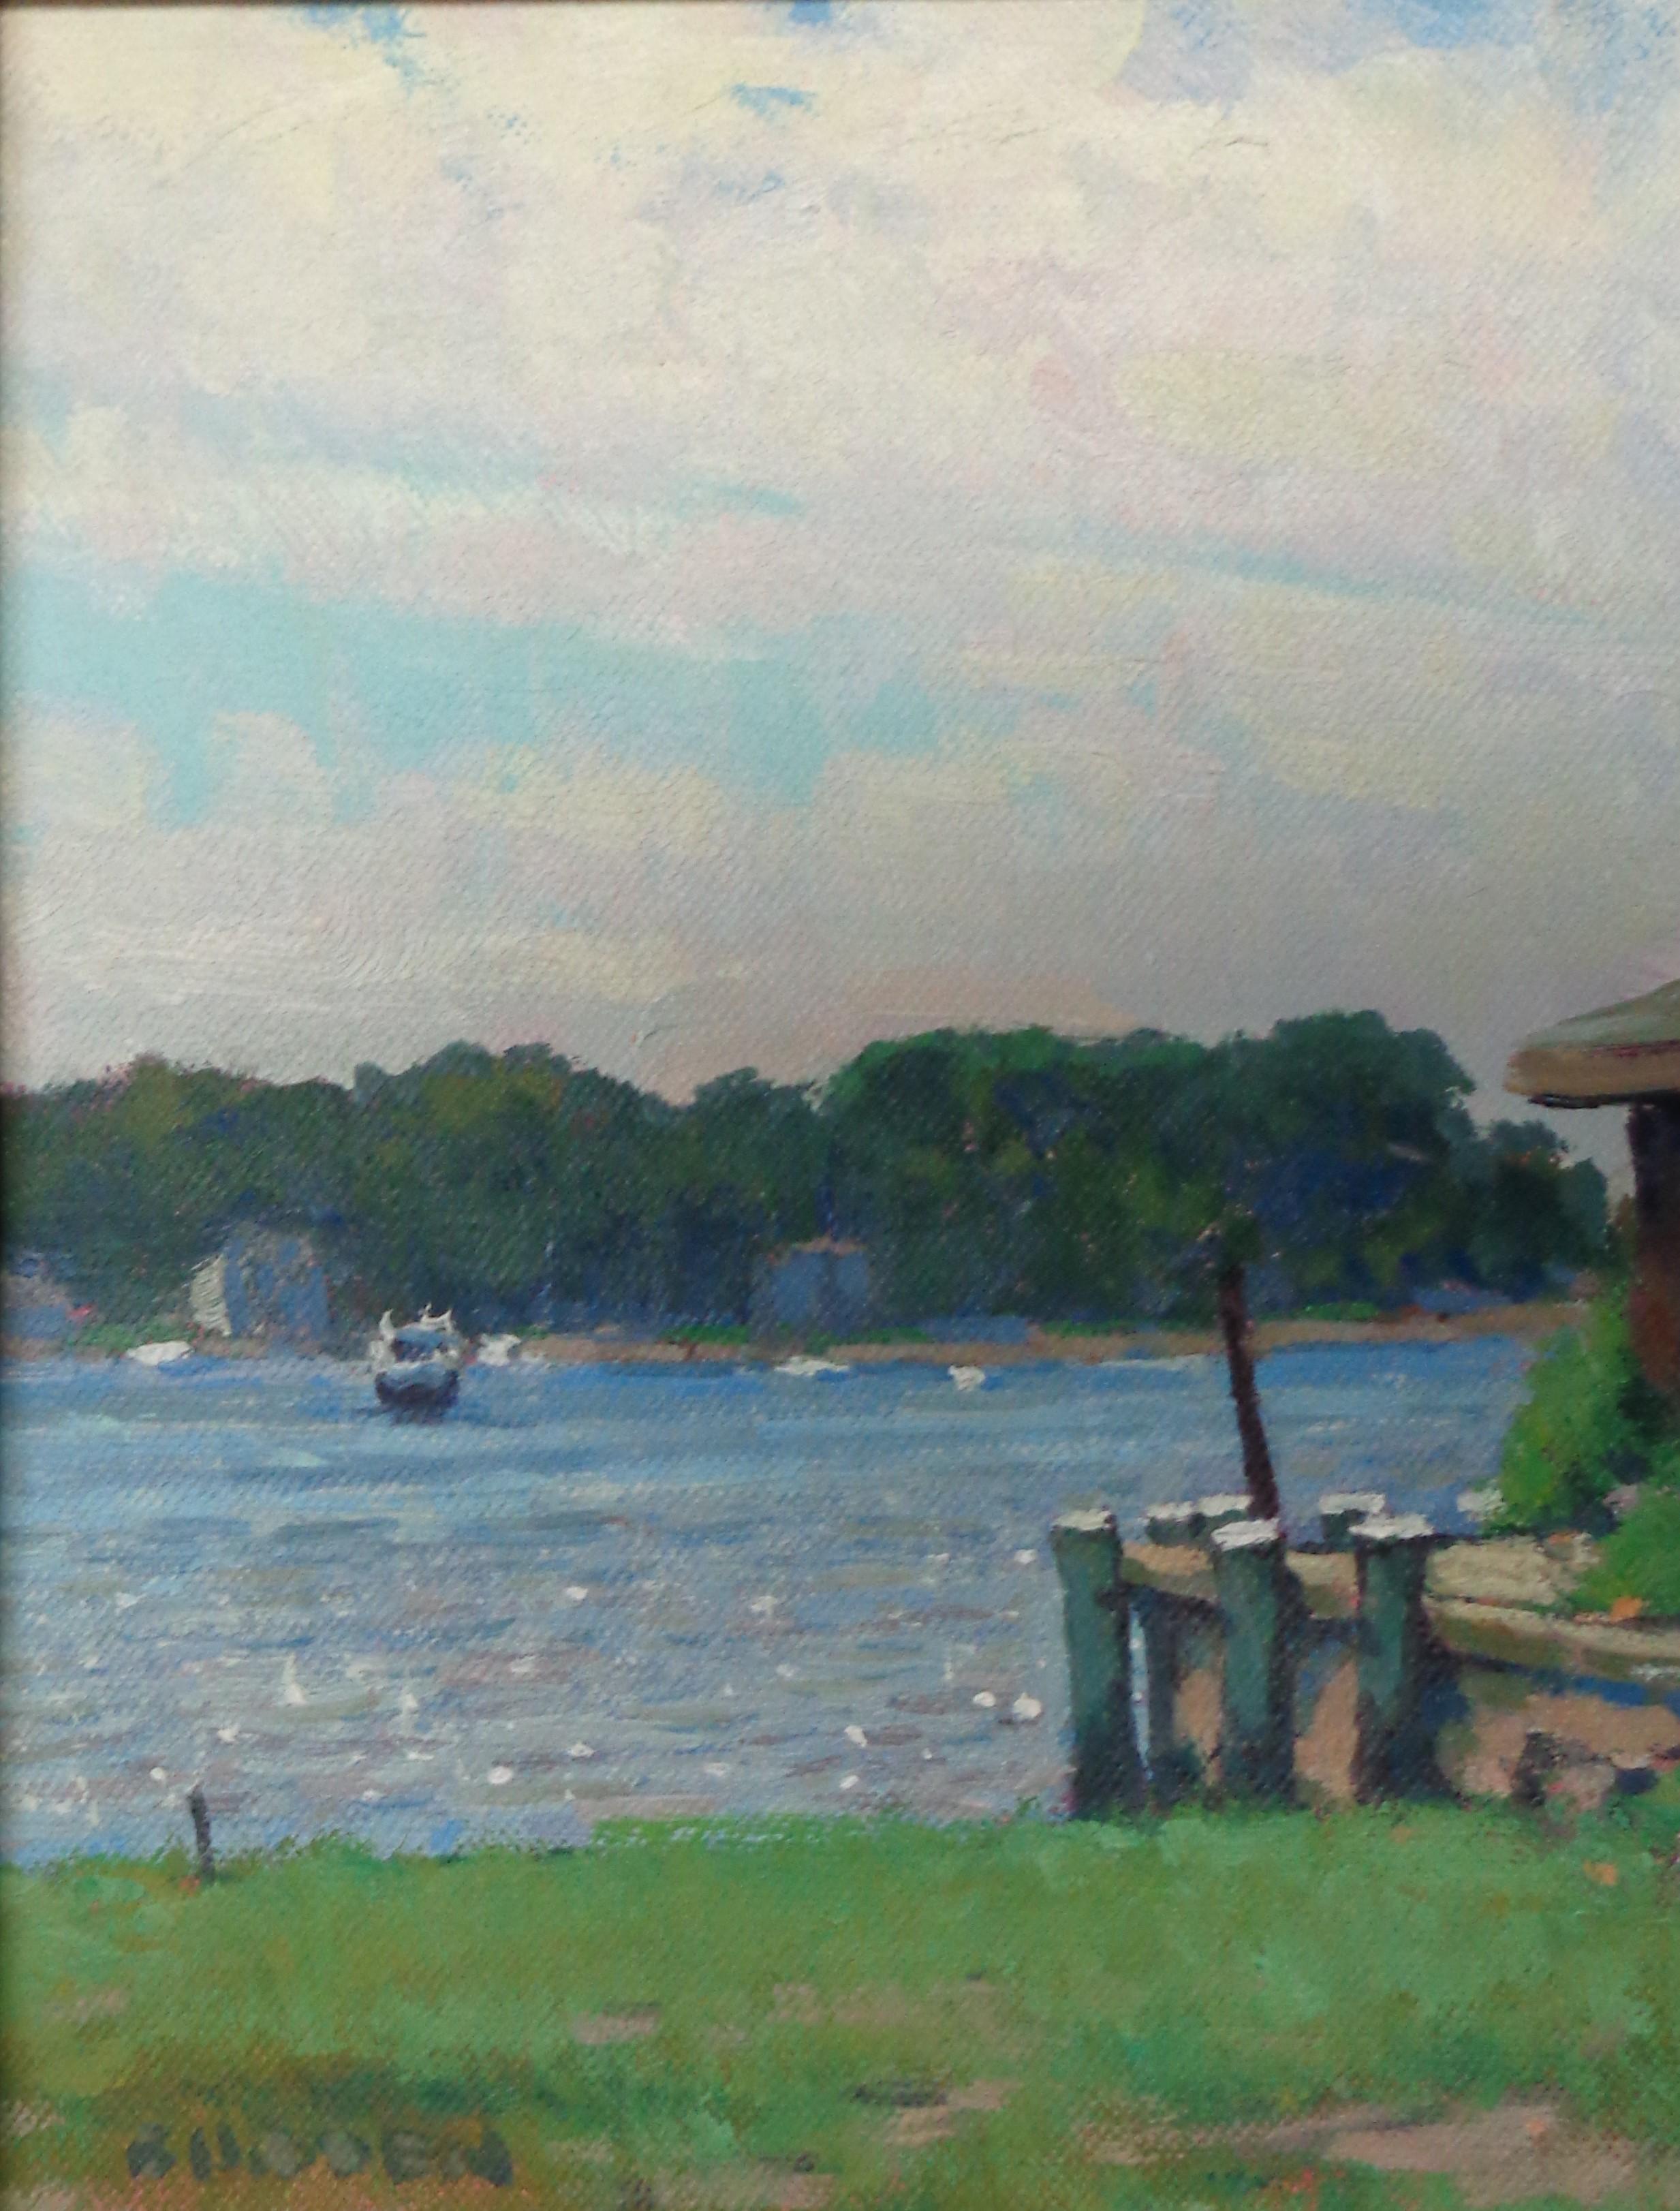 Boat Ocean Impressionistic Marine Painting by Michael Budden Mason;s Island Ct 1